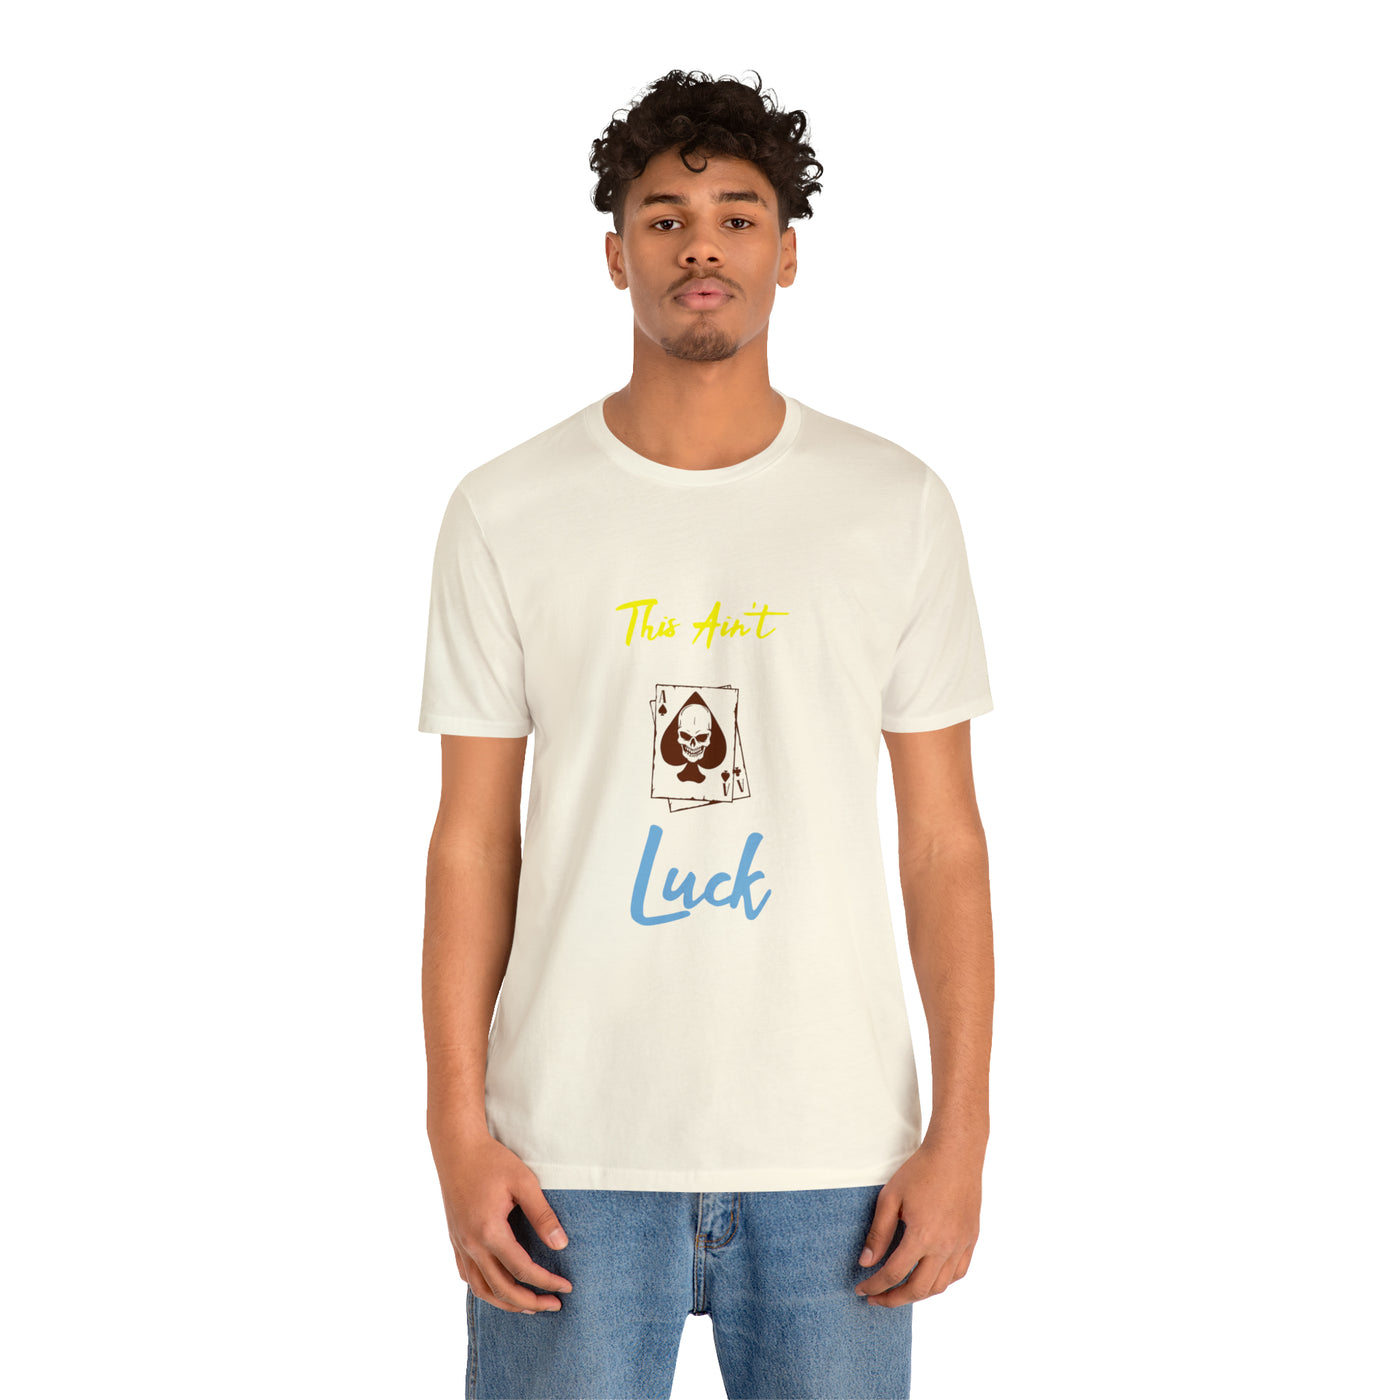 This aint luck Unisex Jersey Short Sleeve Tee - NoCeilingsClothing